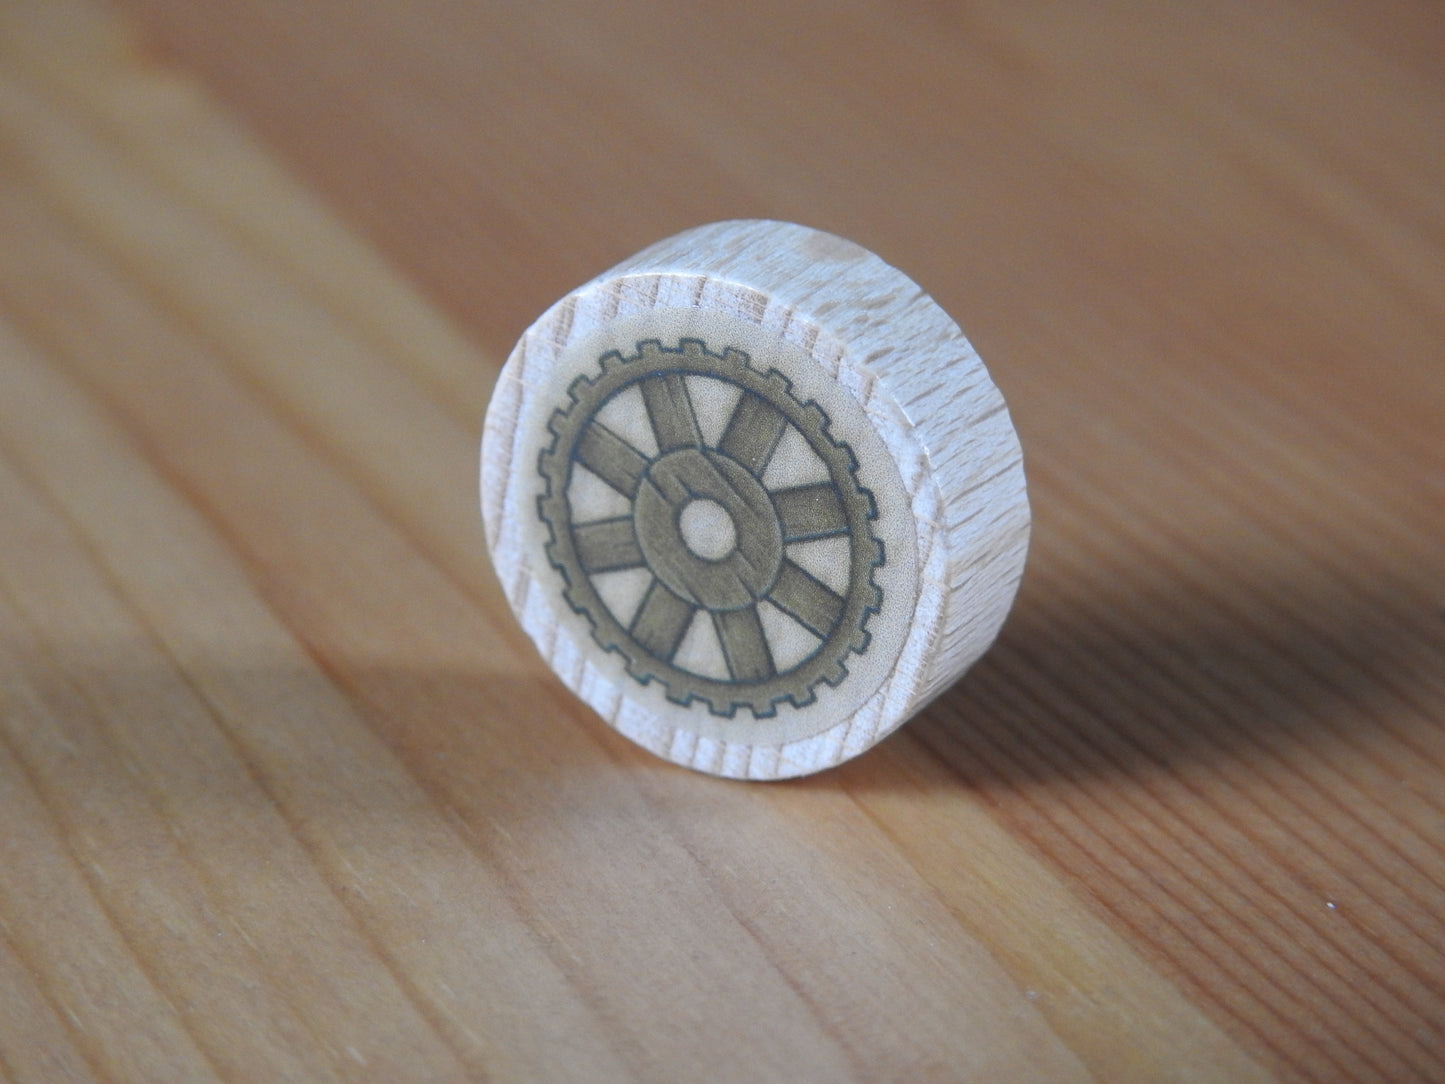 Close up of 1 of the wooden technology wheels that comes with the kit.